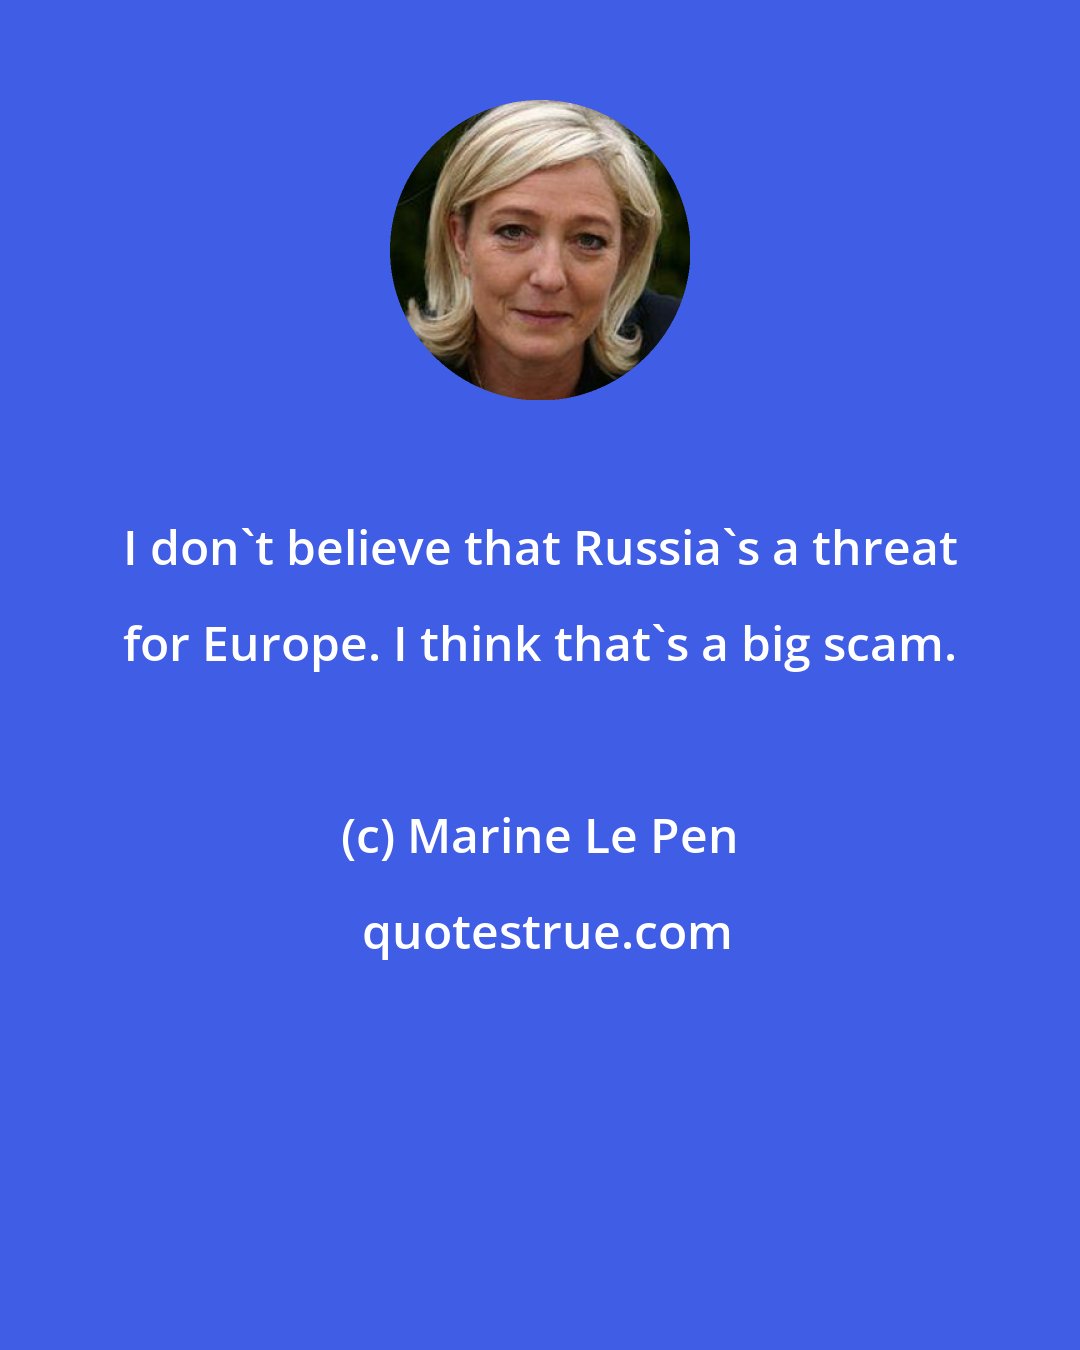 Marine Le Pen: I don't believe that Russia's a threat for Europe. I think that's a big scam.